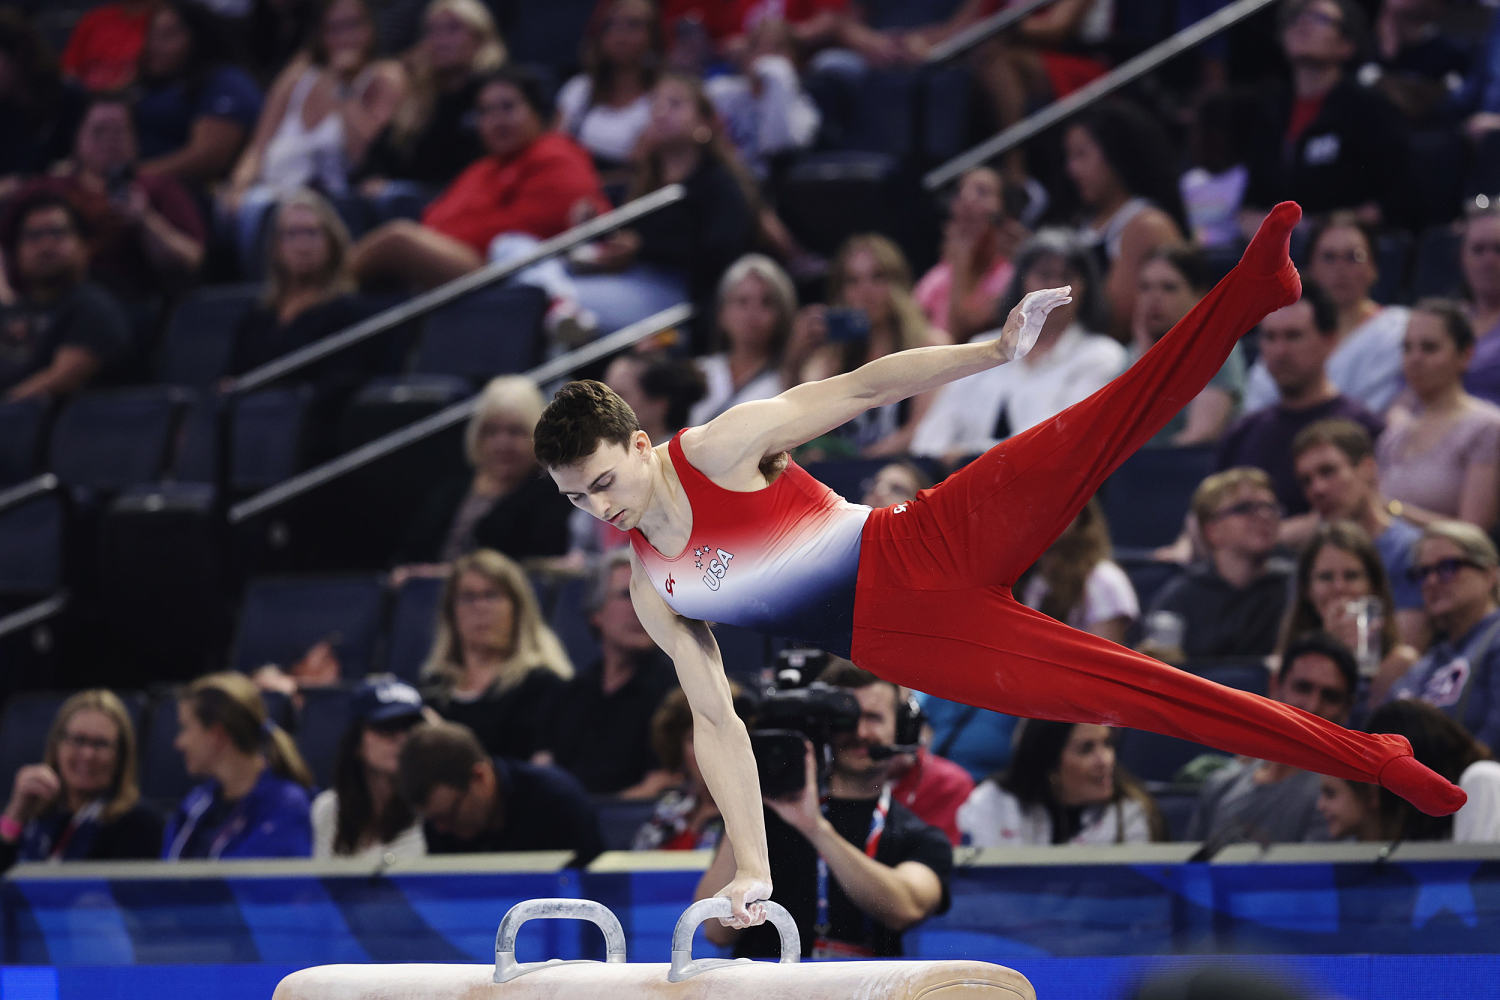 He only has one event — and it could deliver the U.S. men's gymnastics team a medal